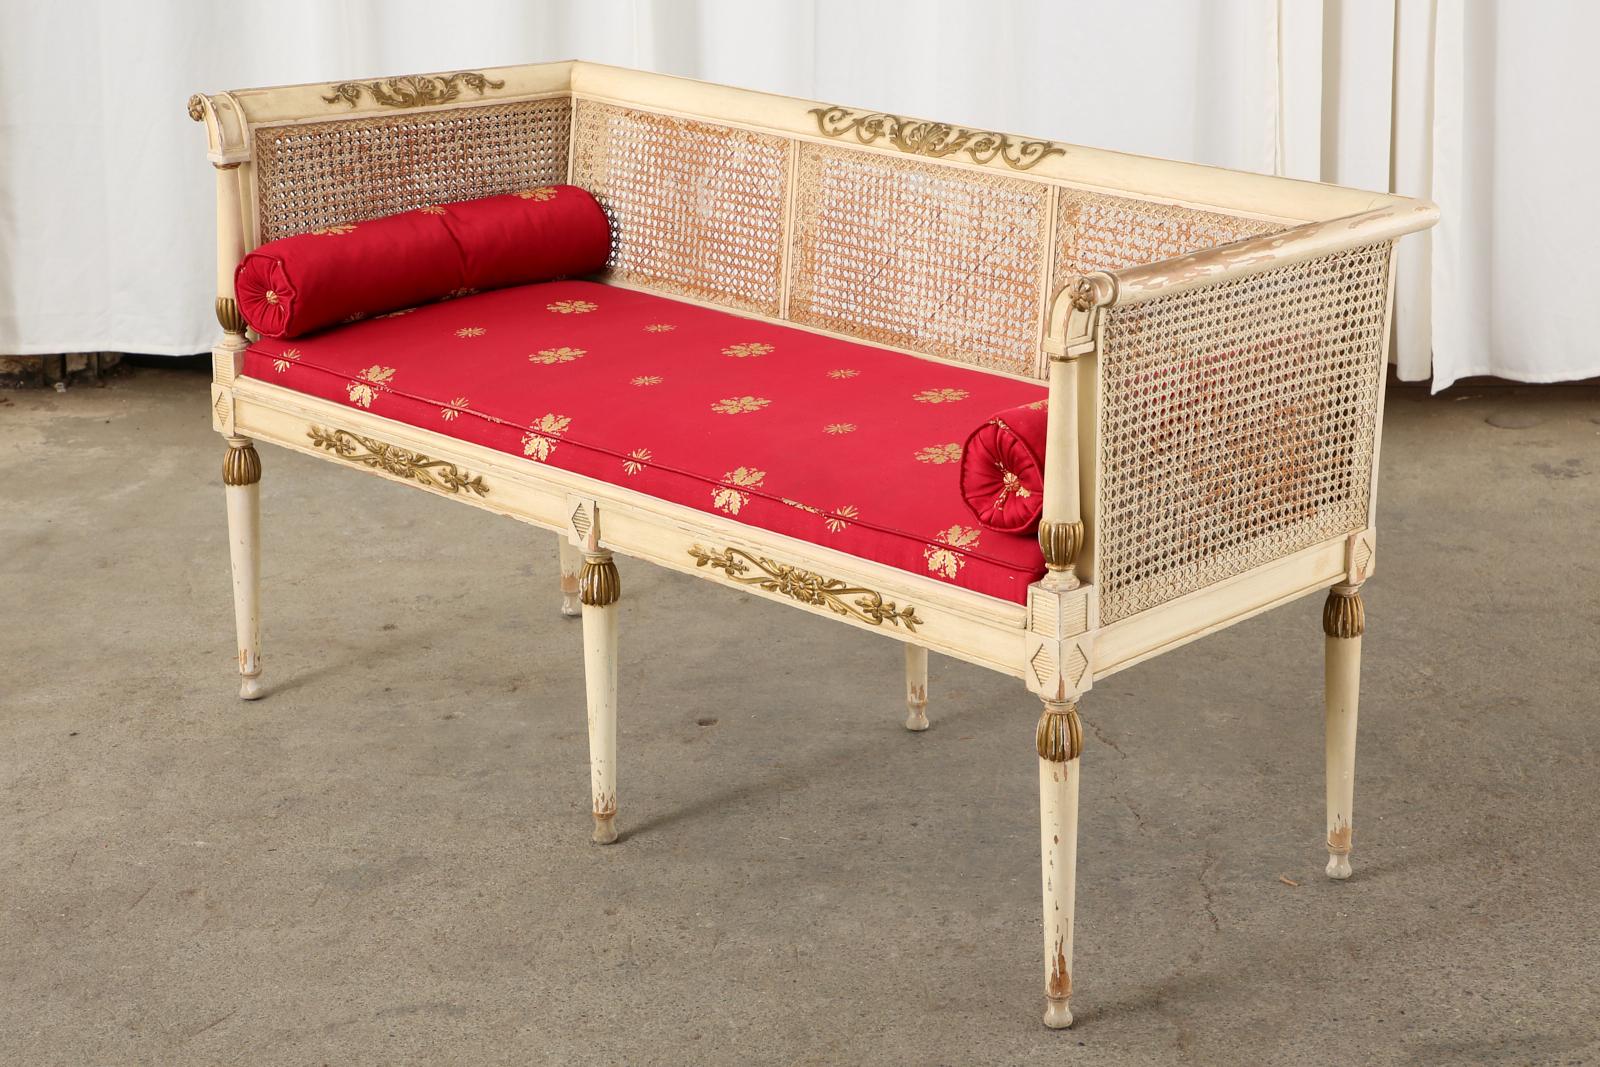 Fantastic Mid-Century Modern Italian painted settee or bench seat featuring caned sides and seat. Crafted in the neoclassical Directoire taste of late 18th century France. The lacquered frame is decorated with rosettes and rocaille in a parcel gilt